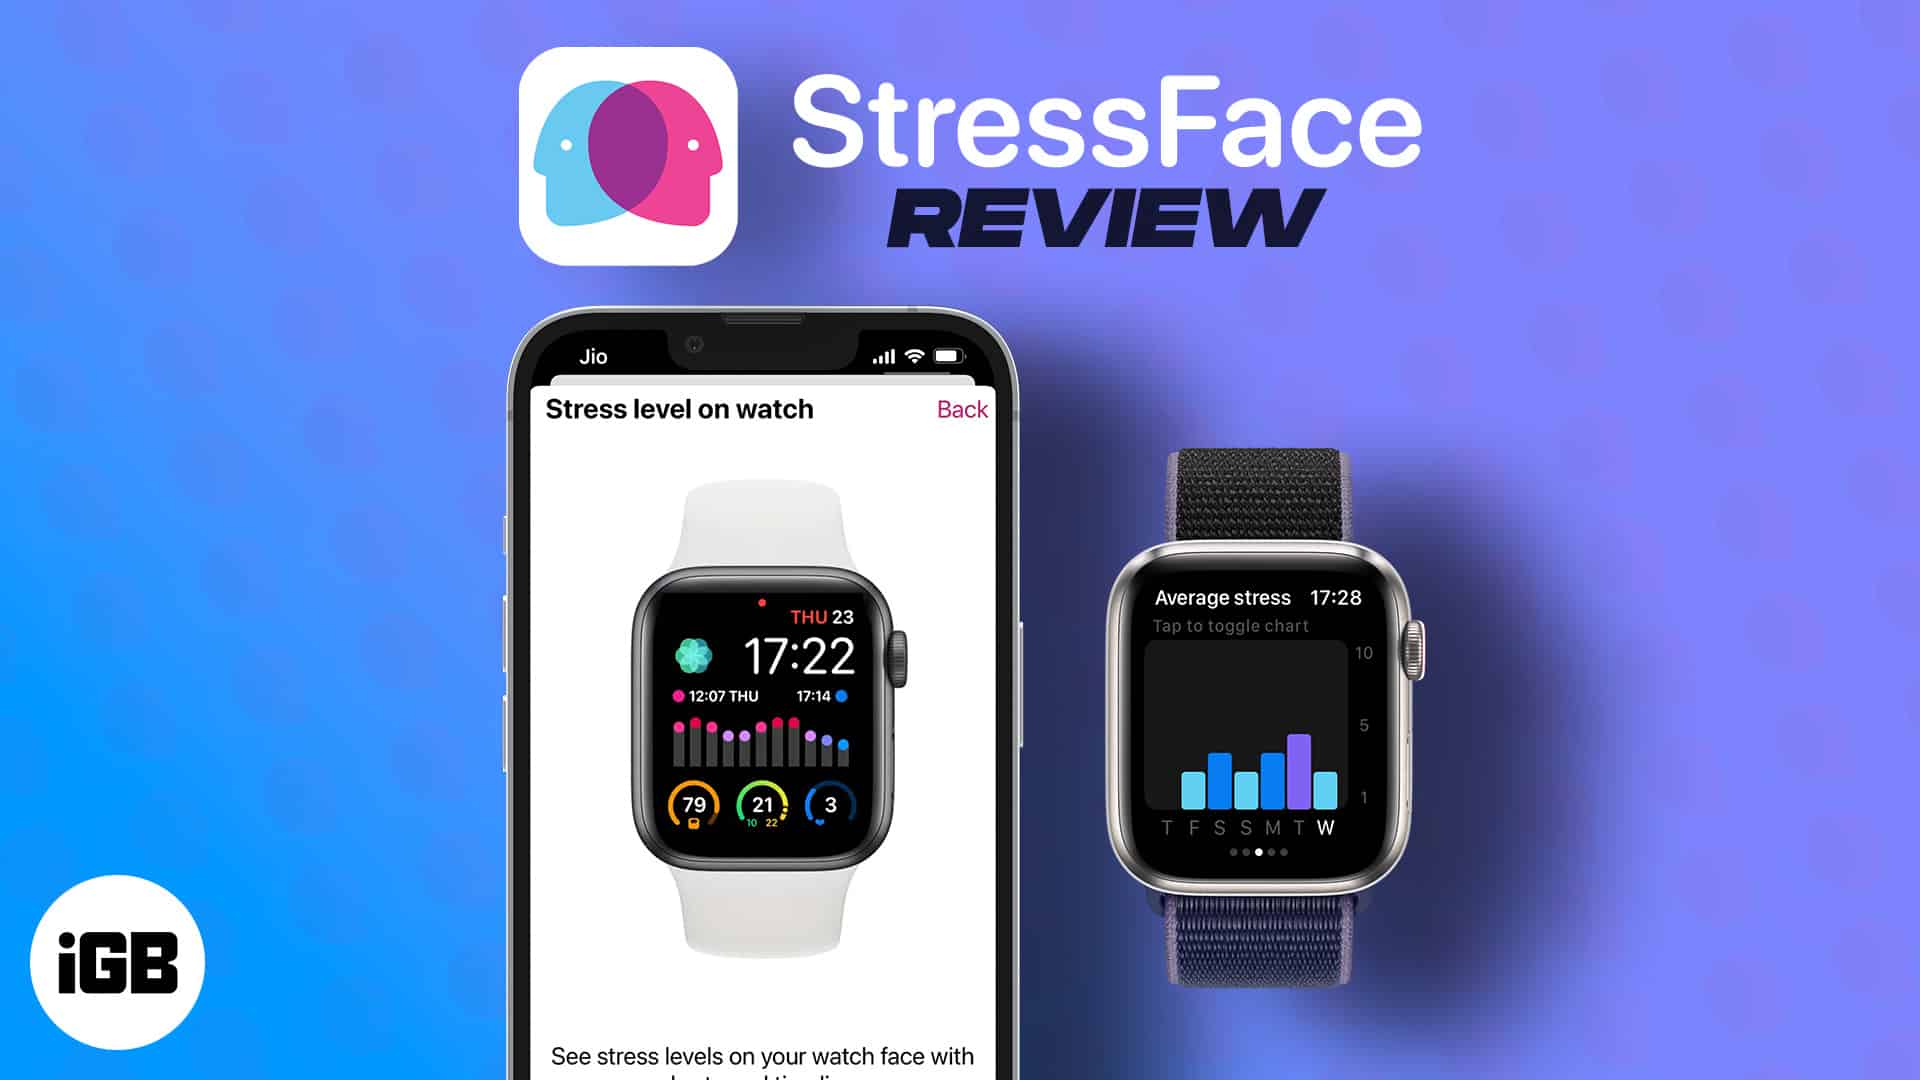 Check and manage your stress levels on apple watch with stressface app